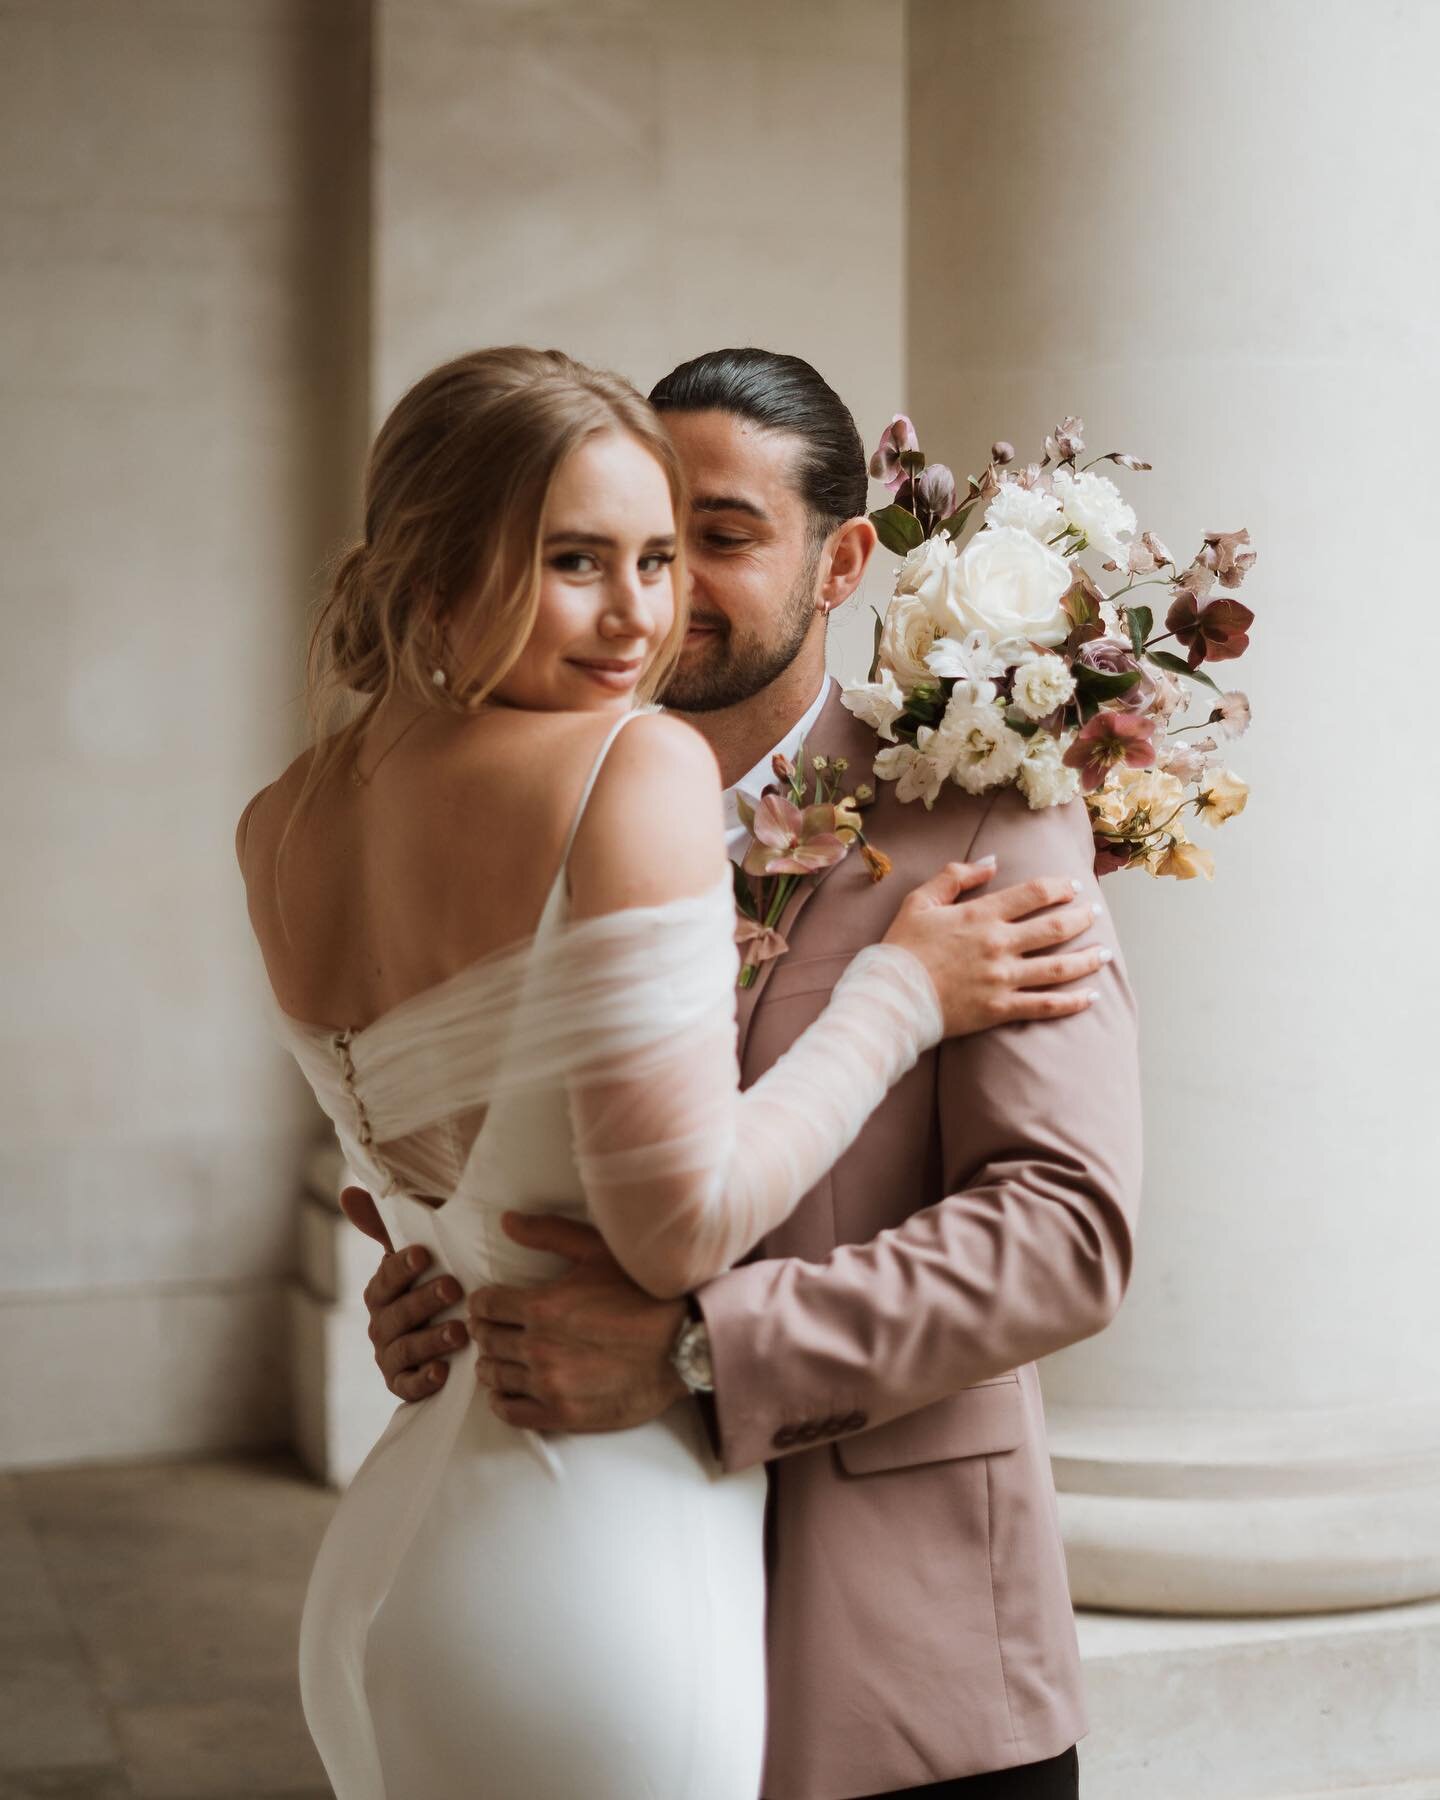 Sharing some of my faves from Sunday&rsquo;s editorial in London 🤍 The colour palette was soooo good!

Such a gorgeous group of suppliers and lovely to finally work with @abstracteventsuk after months of chatting through instagram! x

Planning, conc